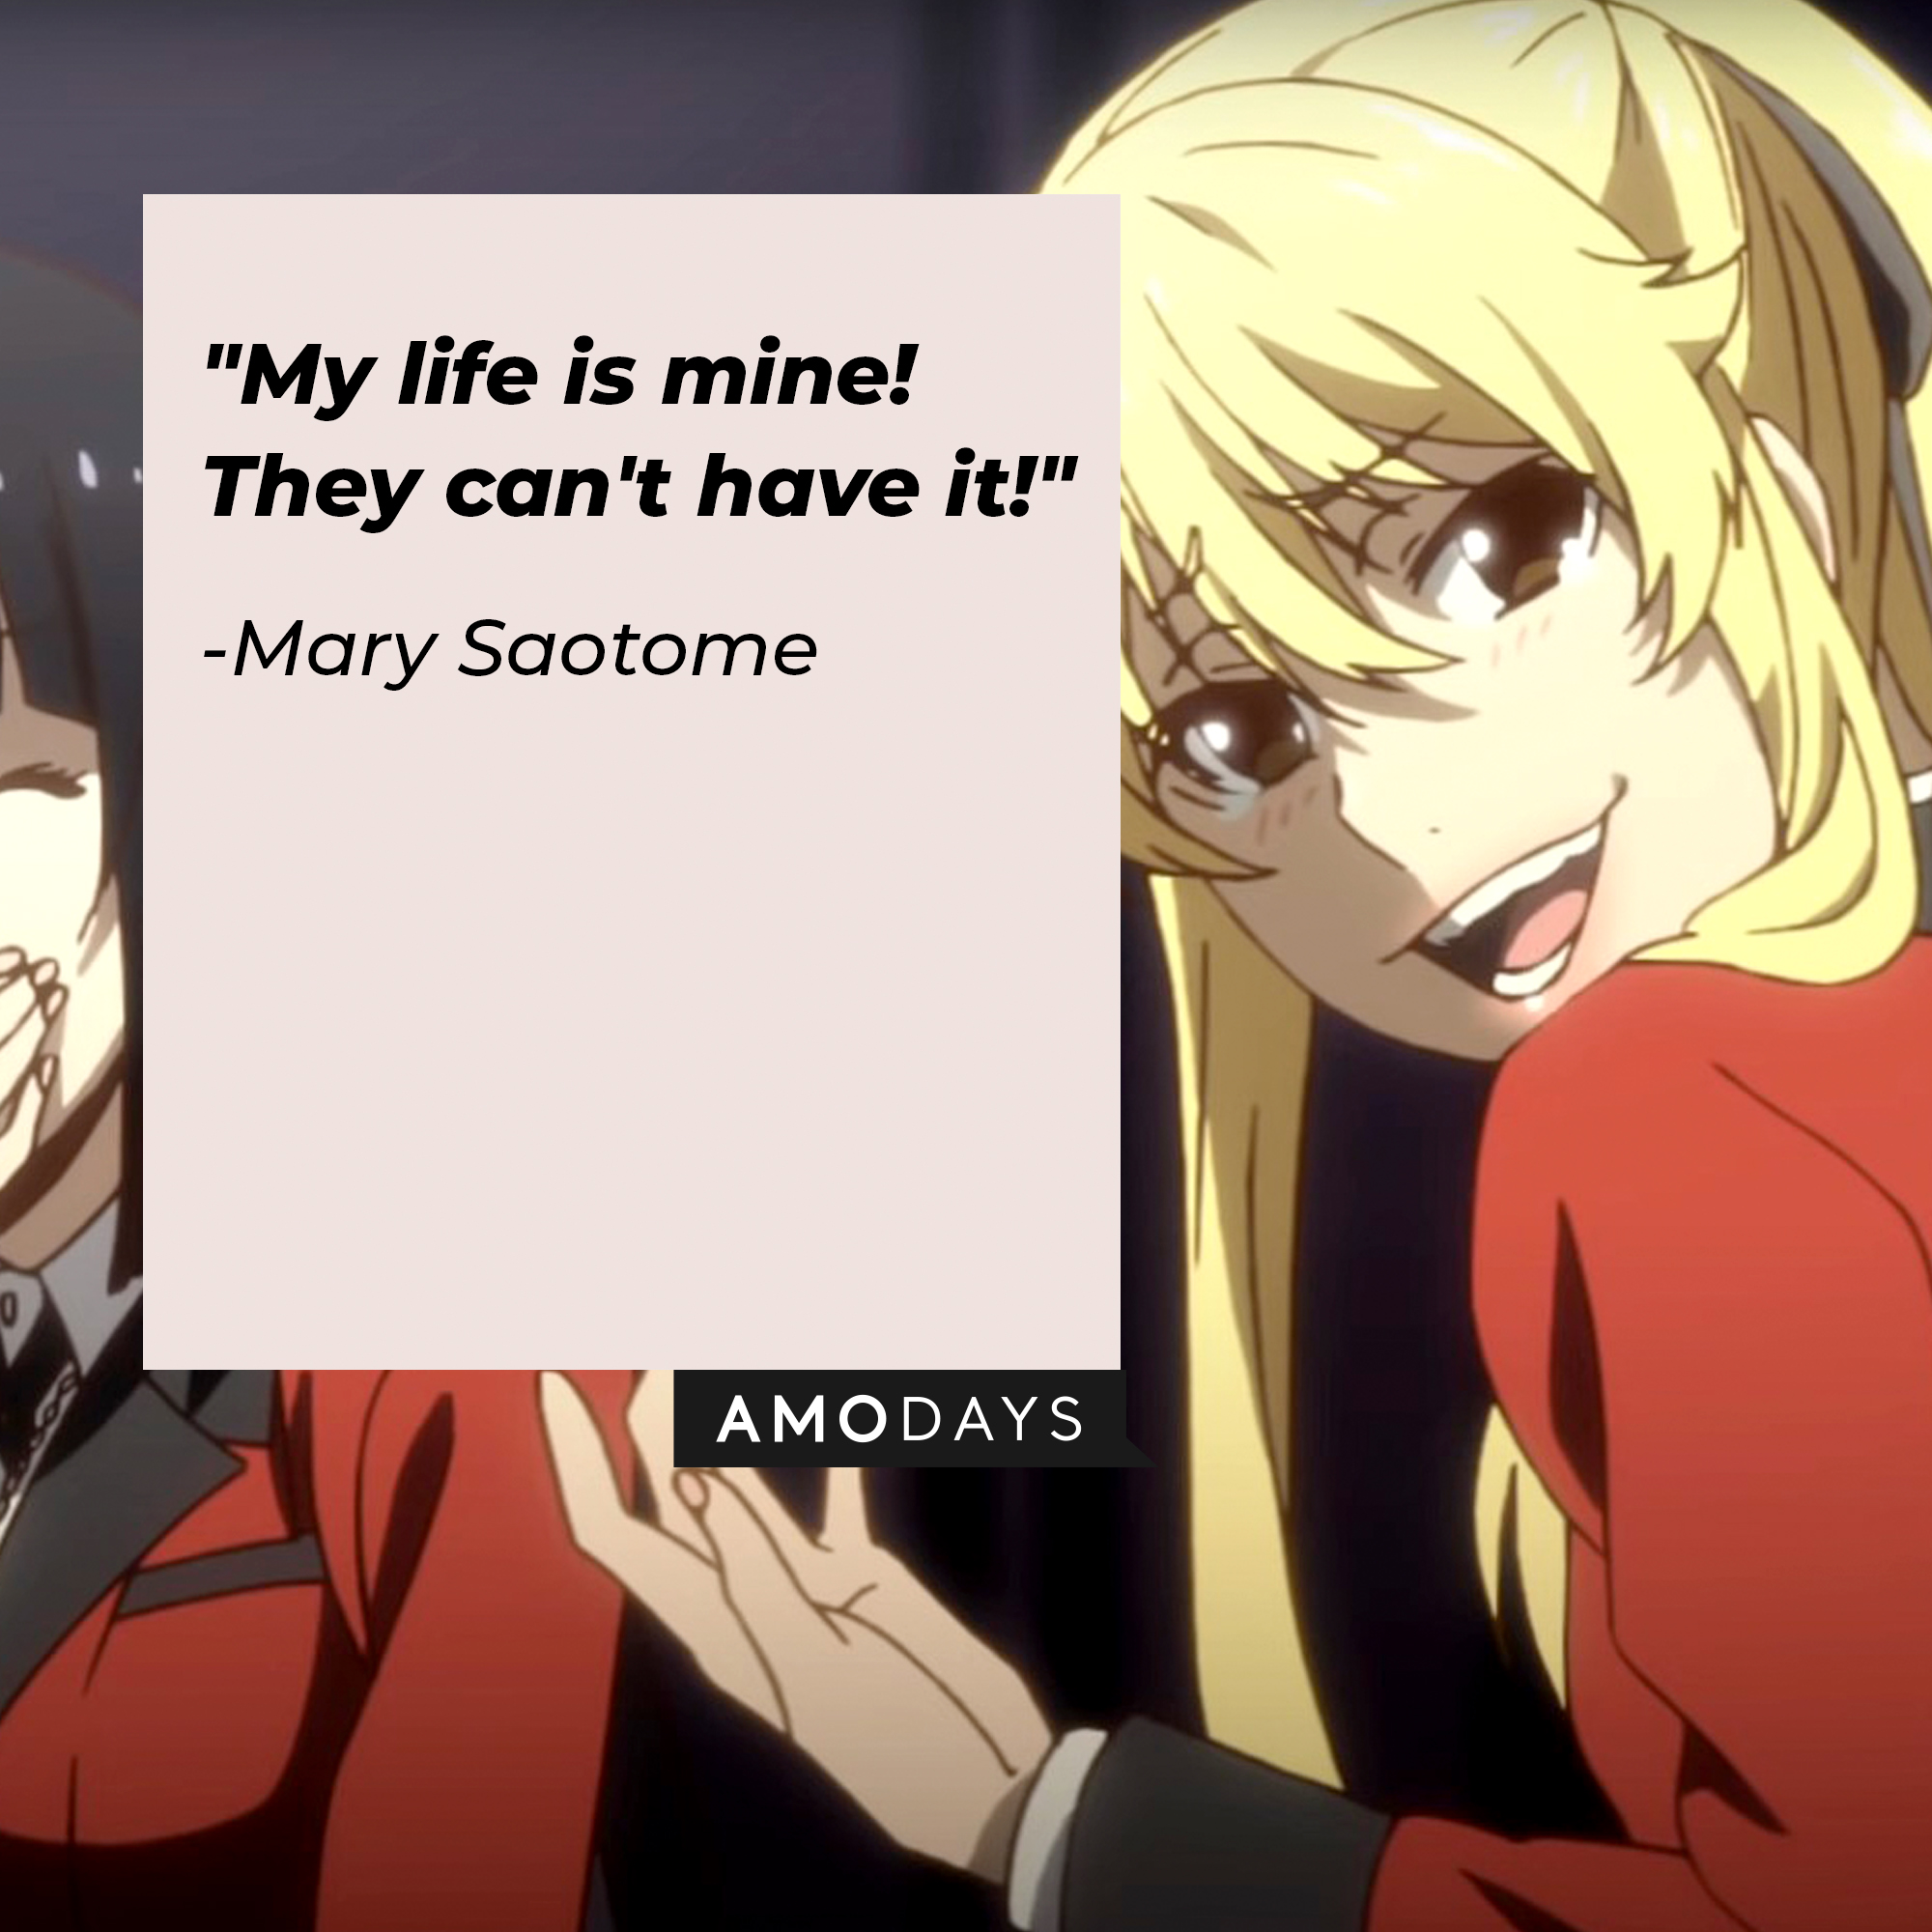 A picture of Mary Saotome with her quote: "My life is mine! They can't have it!" | Source: youtube.com/netflixanime